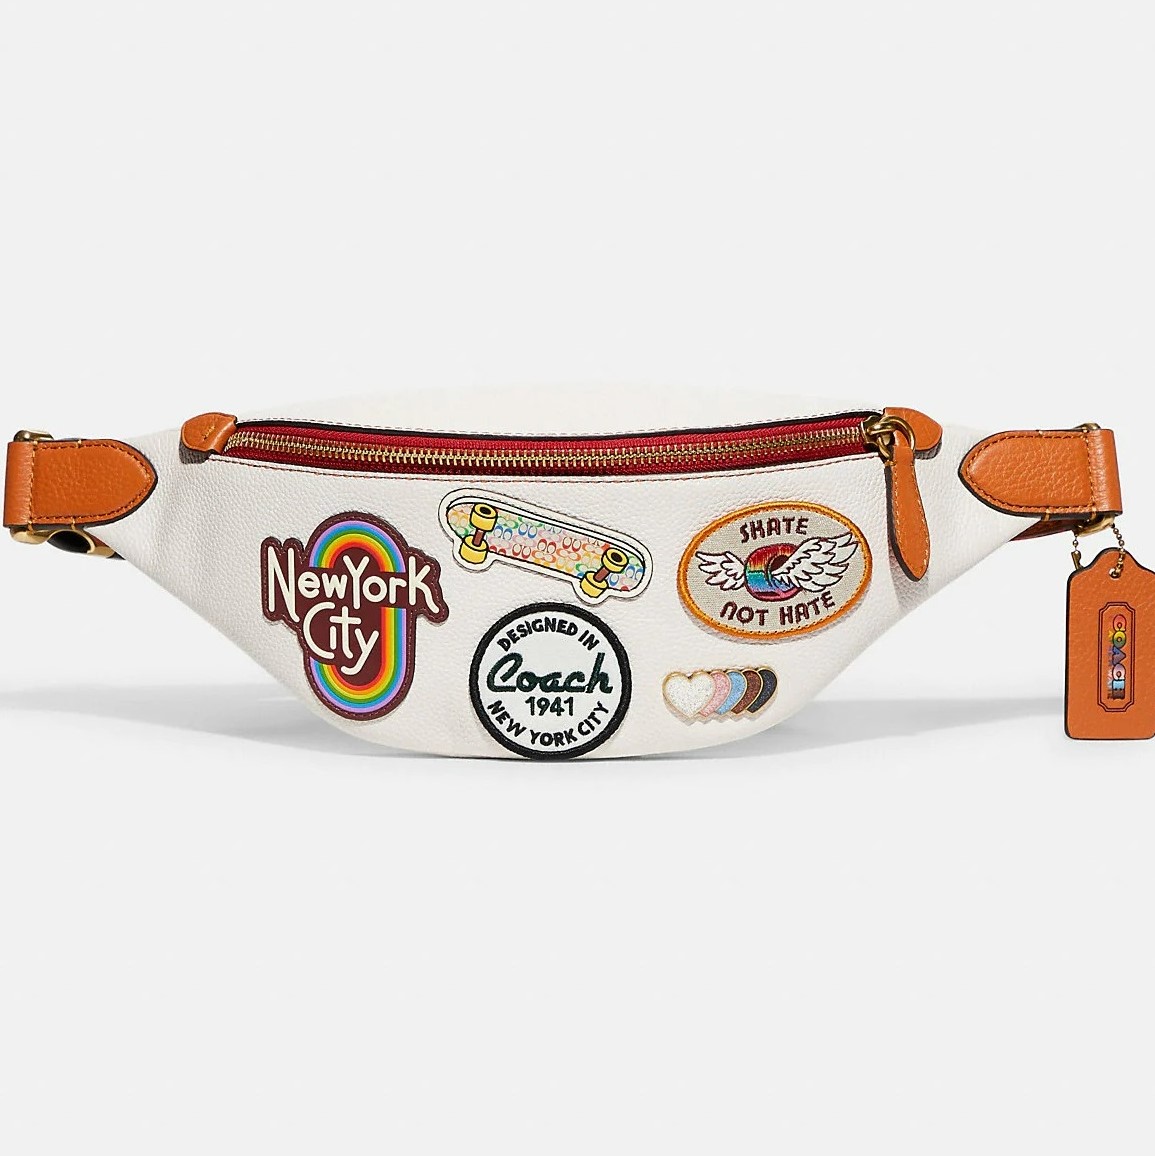 TÚI BAO TỬ UNISEX COACH NEW YORK CITY CHARTER BELT BAG 7 WITH PATCHES 11